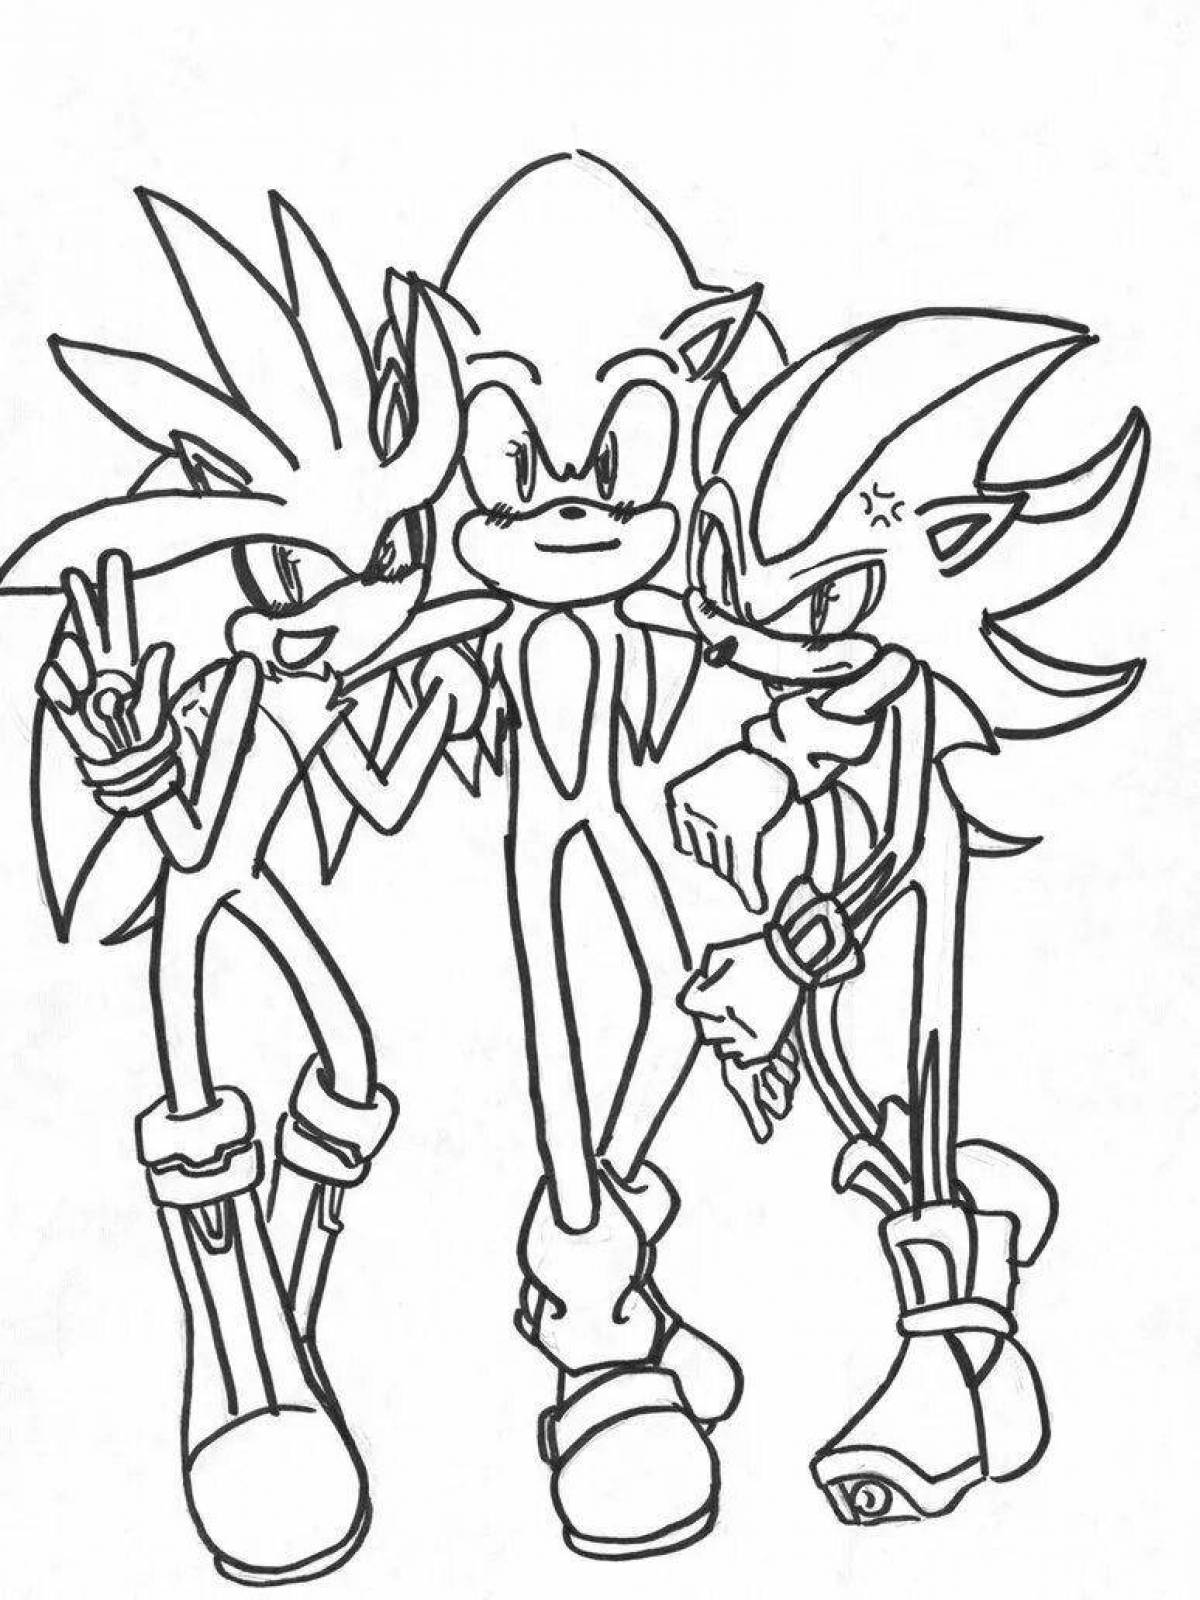 Amazing sonic shredder coloring page